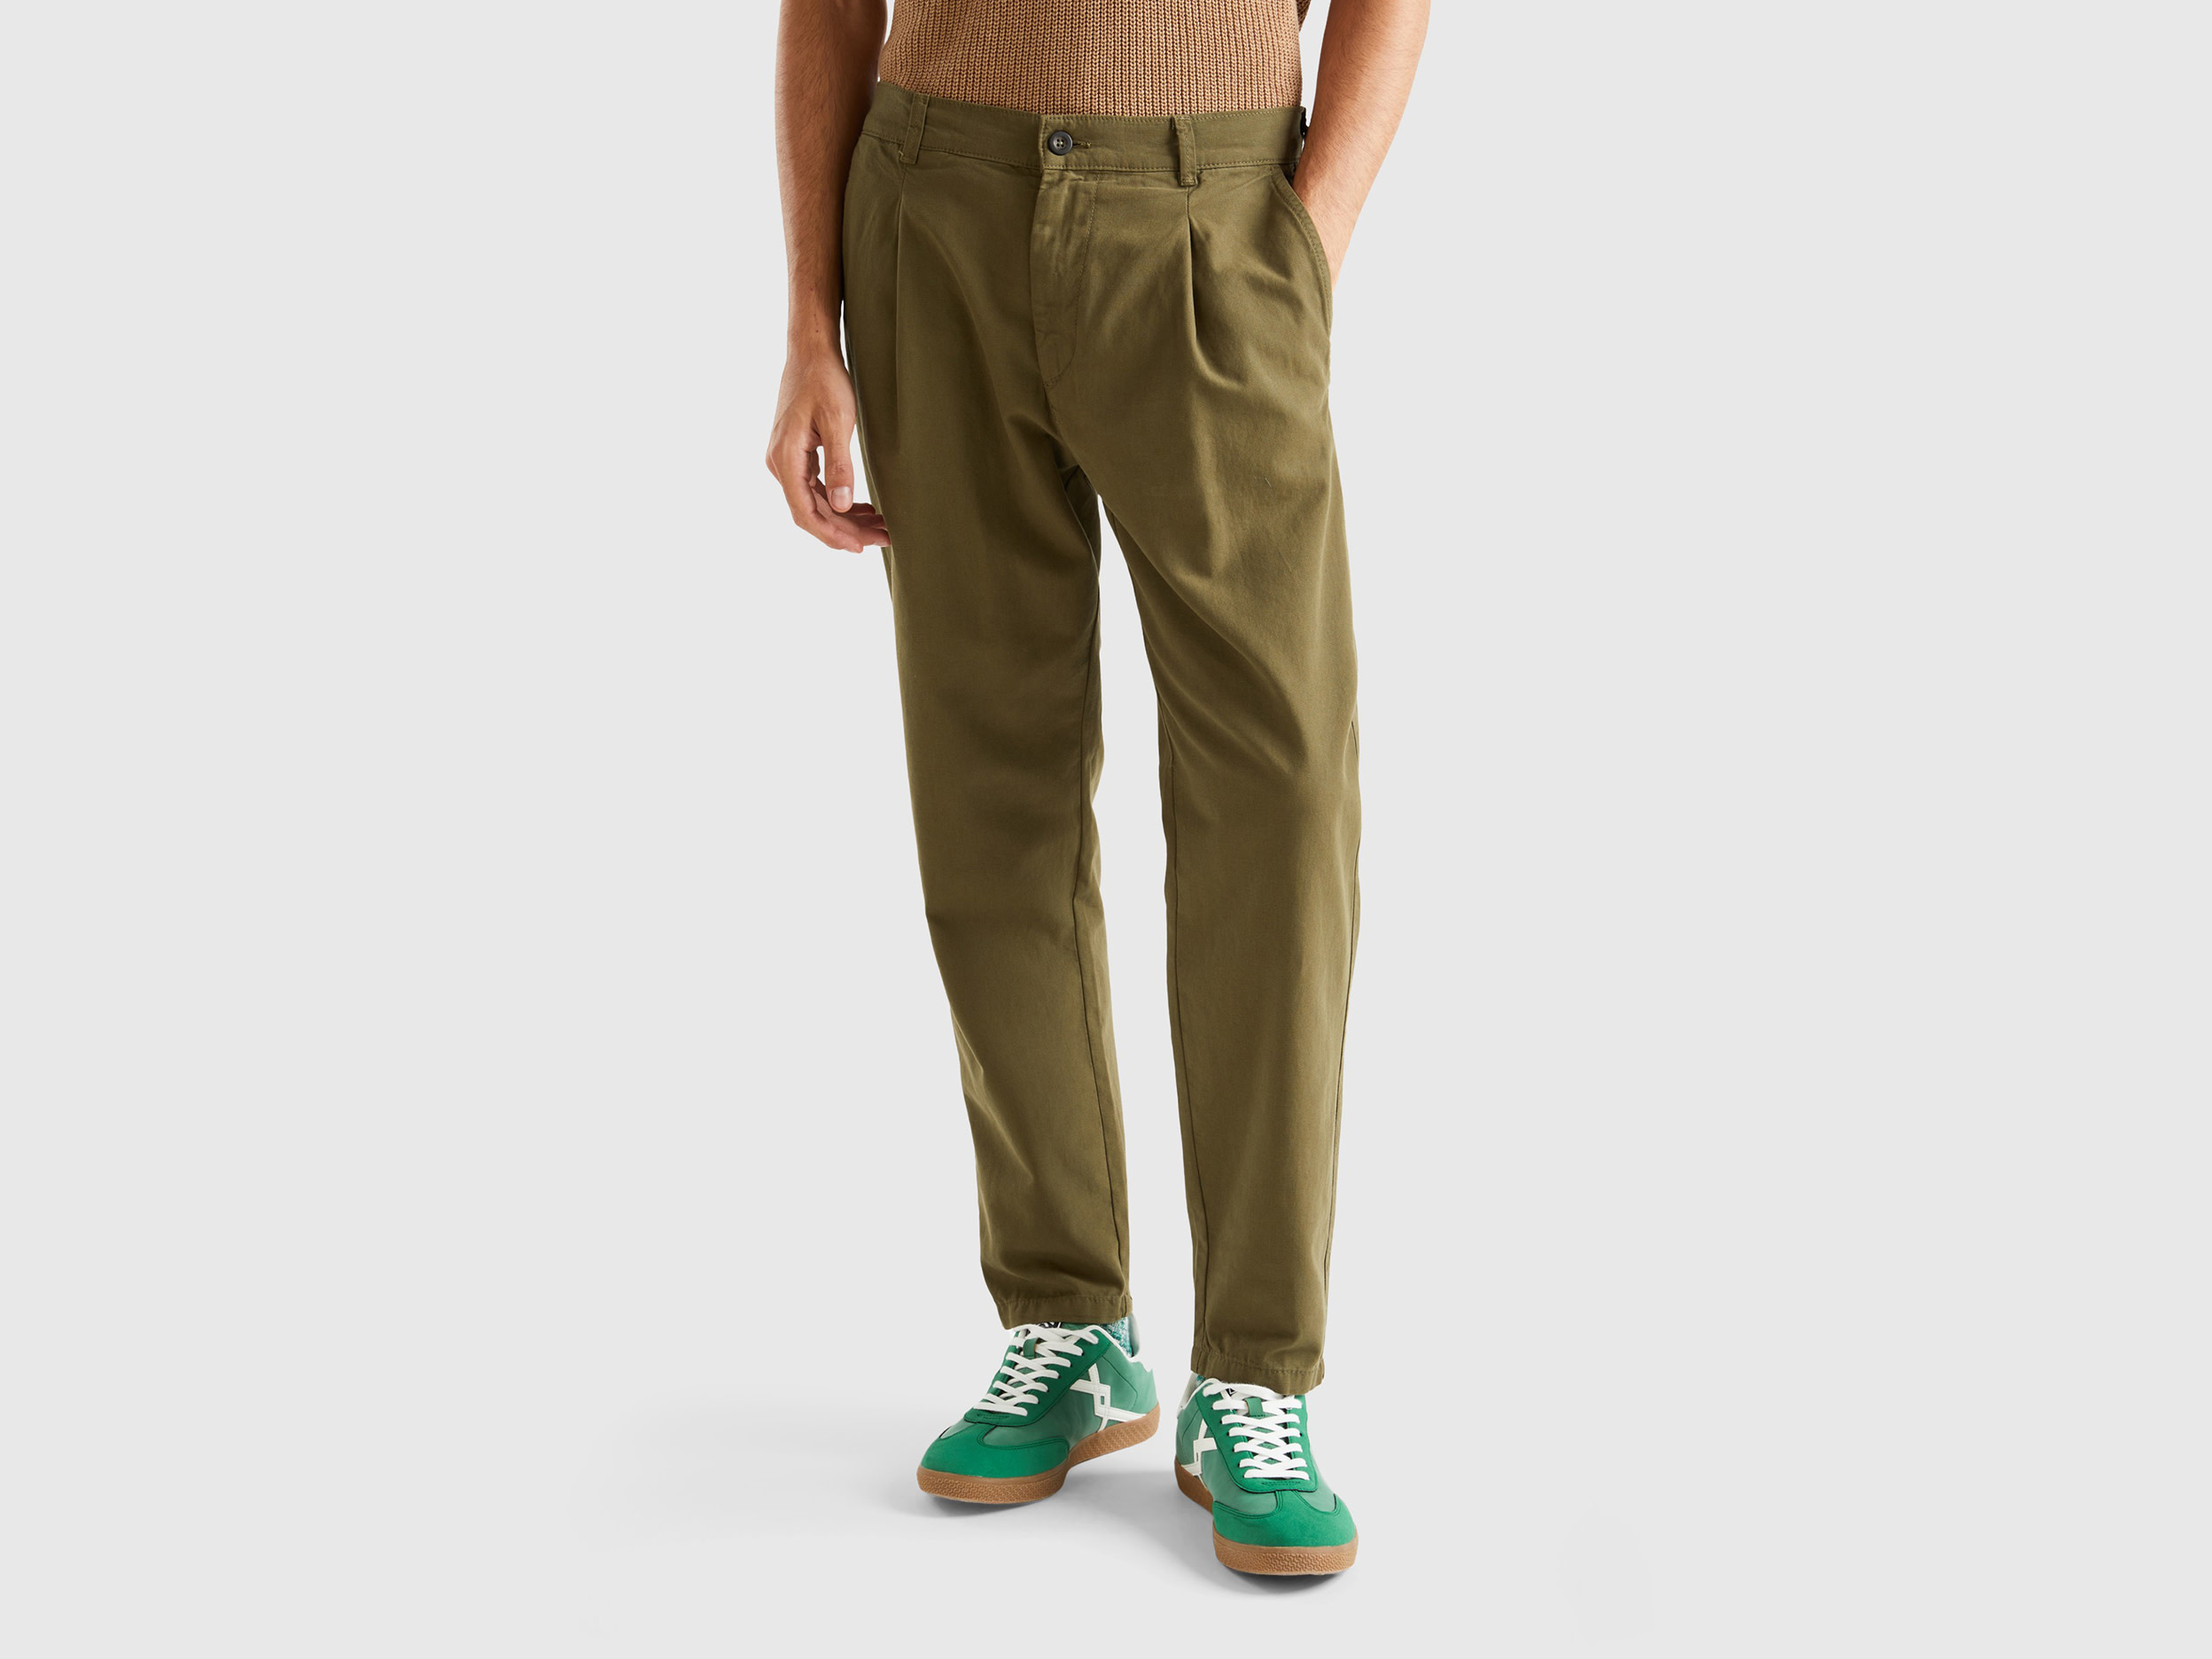 Benetton, Carrot Fit Chinos In Light Cotton, size 34, Military Green, Men